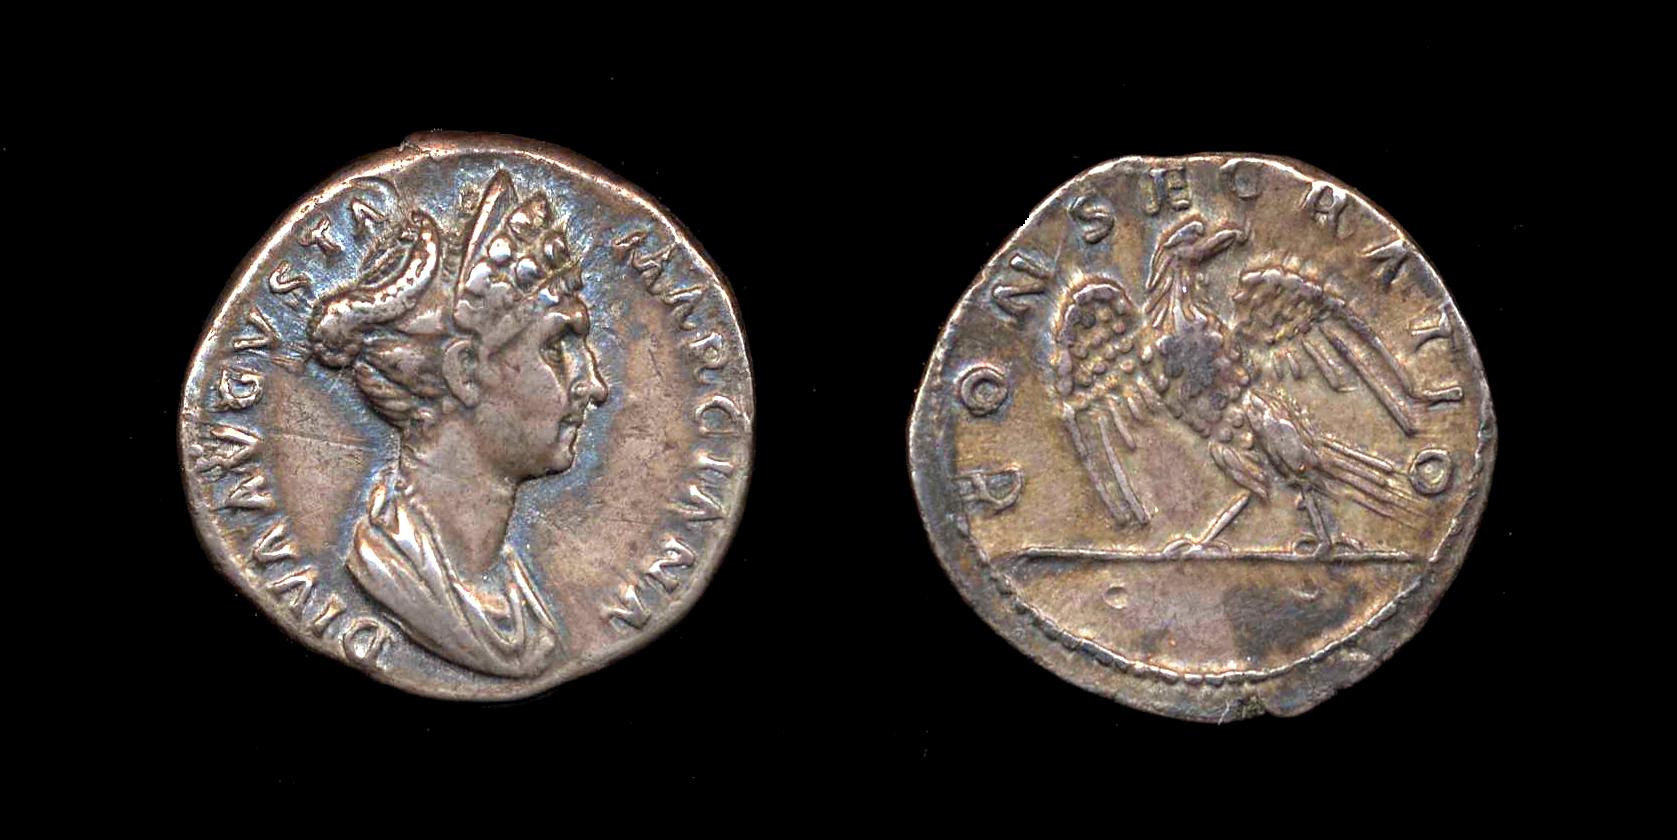 a roman silver coin with a woman holding a sword